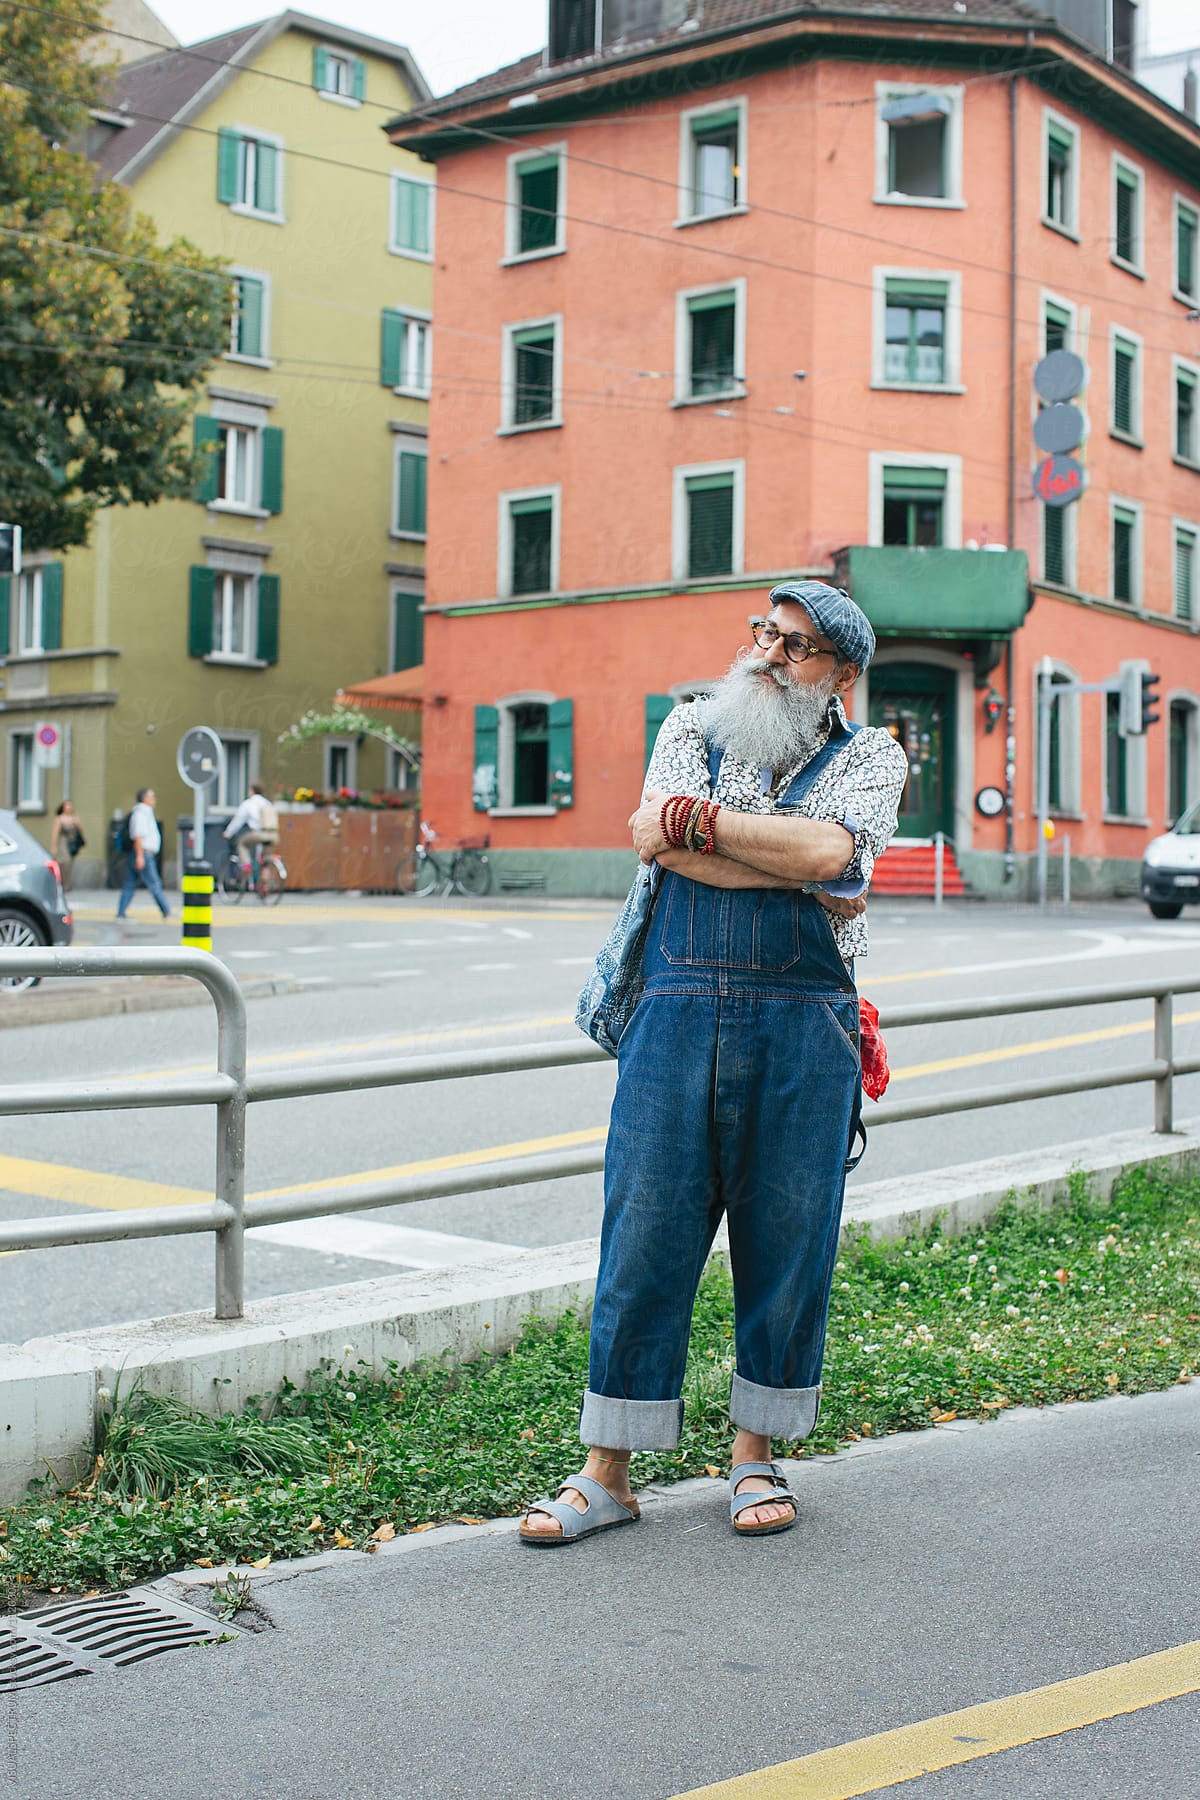 Outdoor City Portrait of Cool Stylish Old Man With Long Grey Hipster Beard